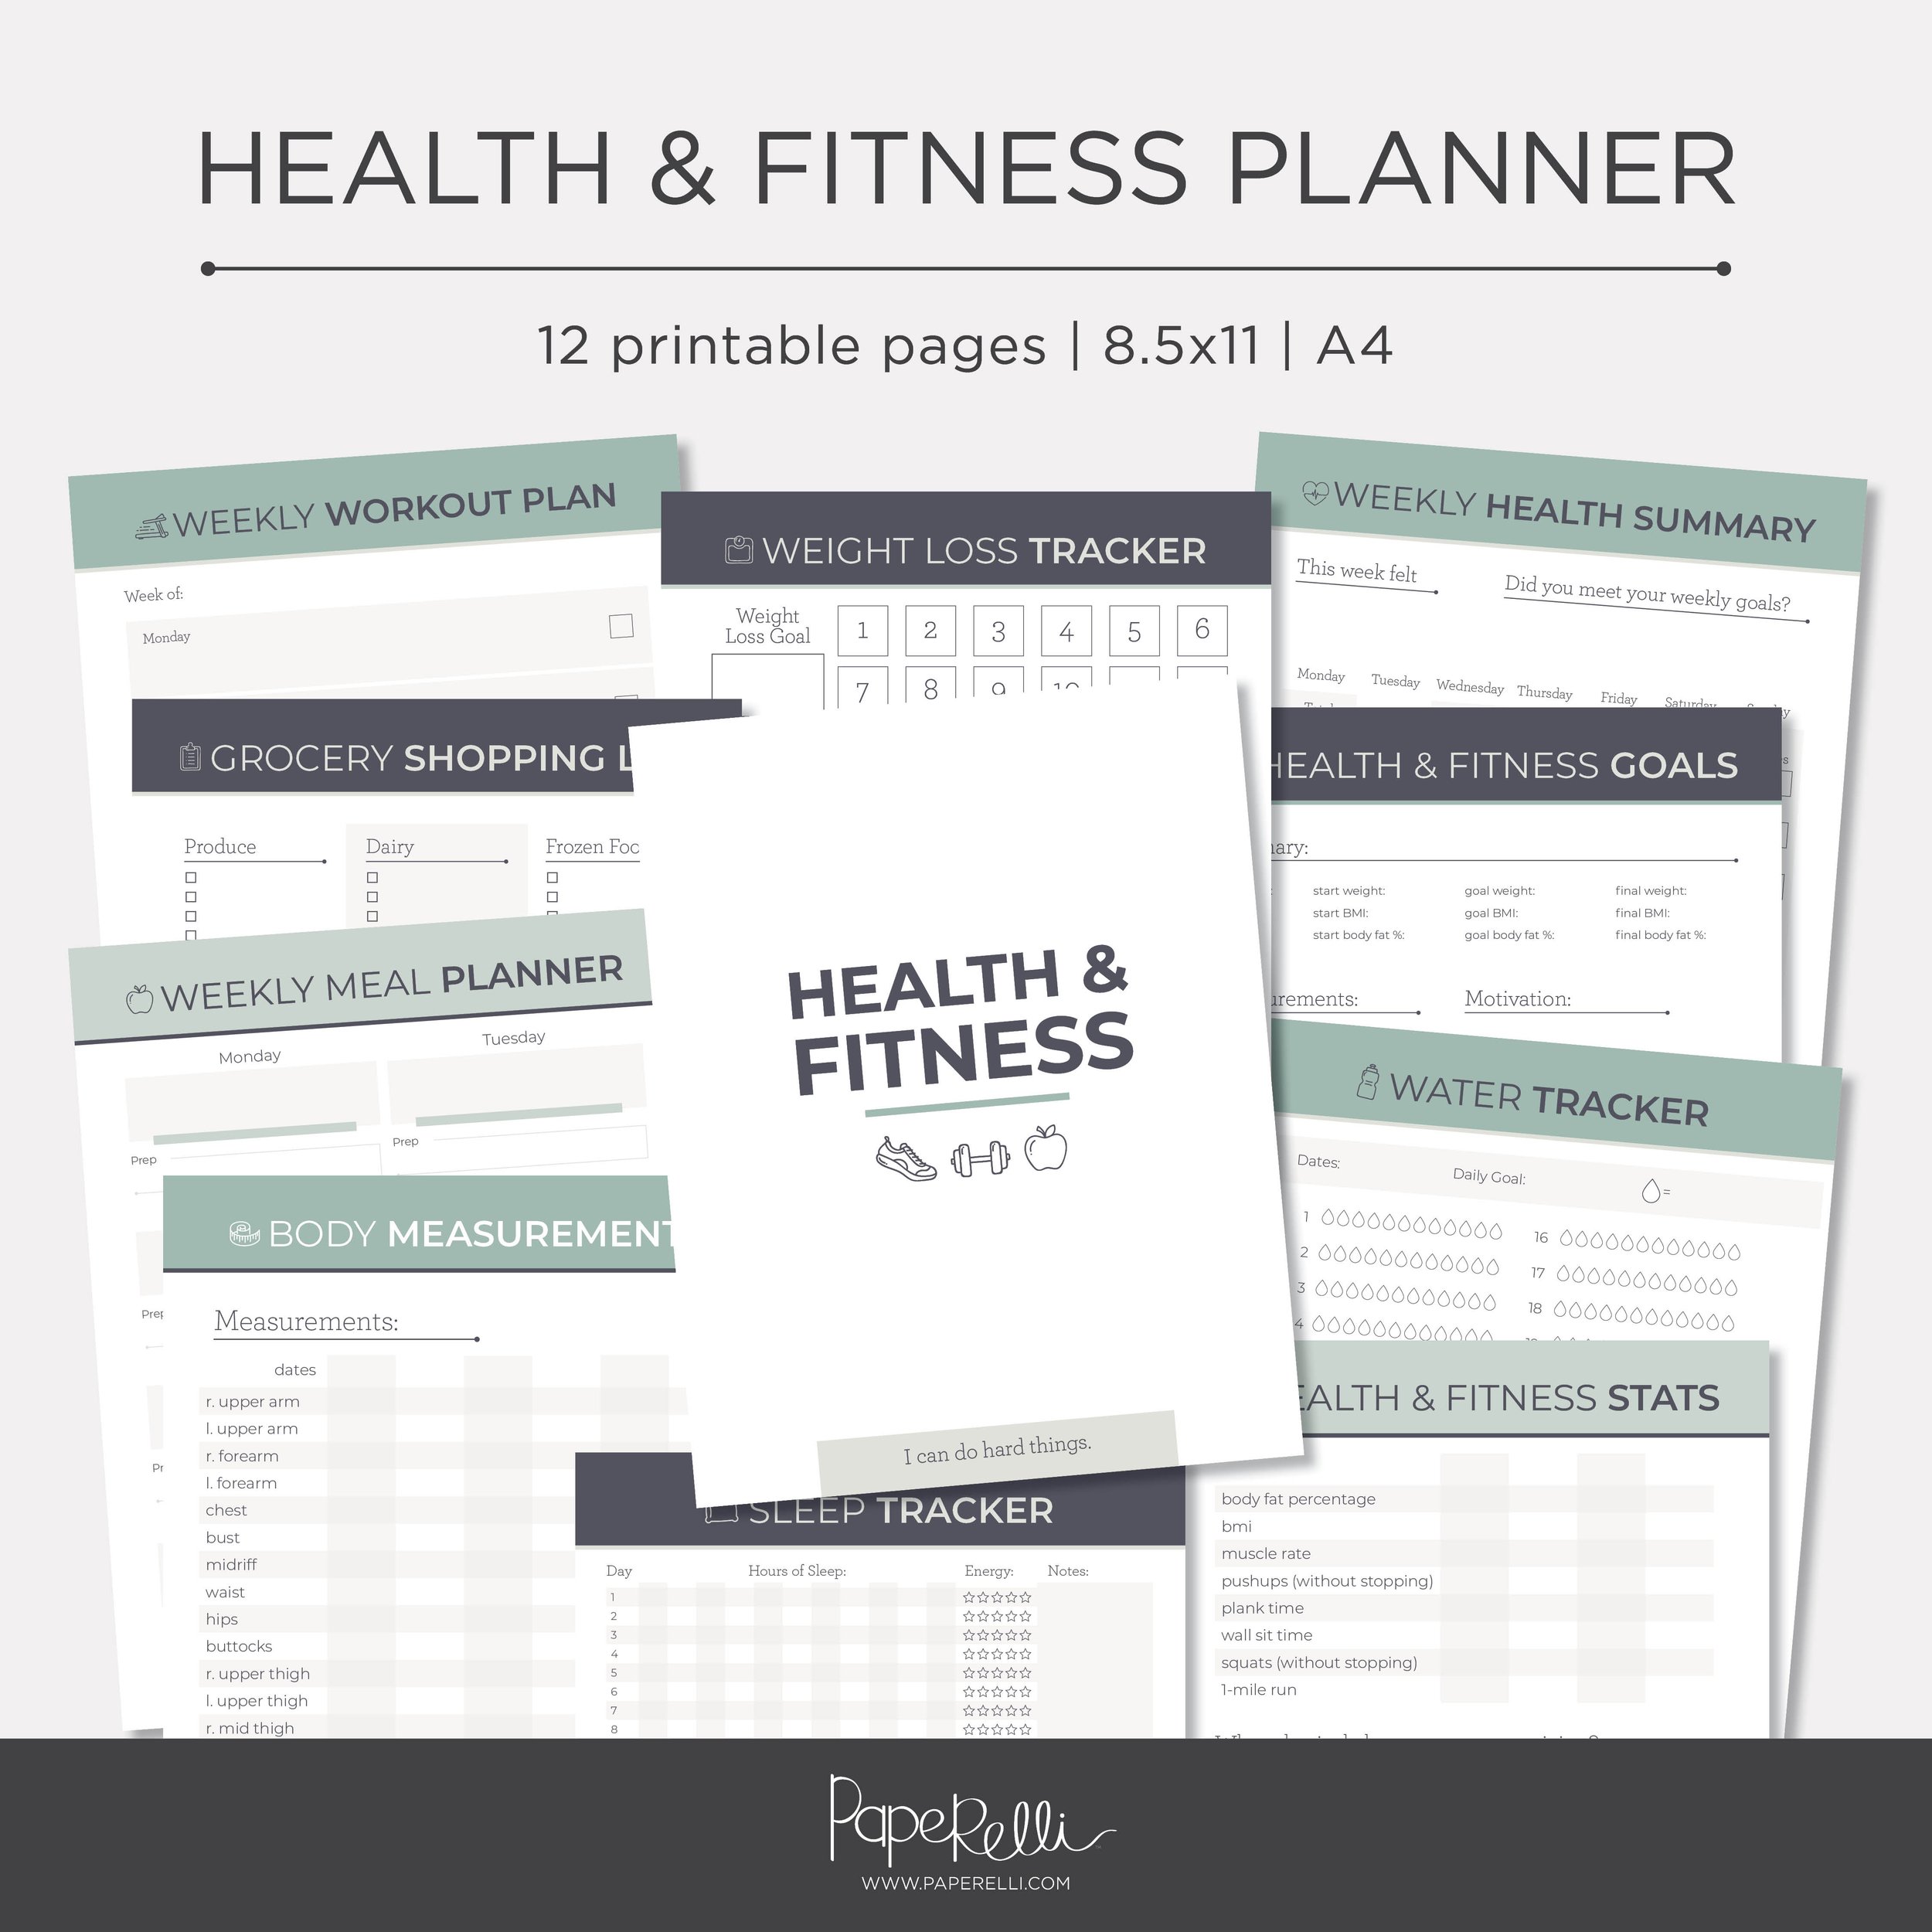 Health and Fitness Planner Images for Etsy.jpg